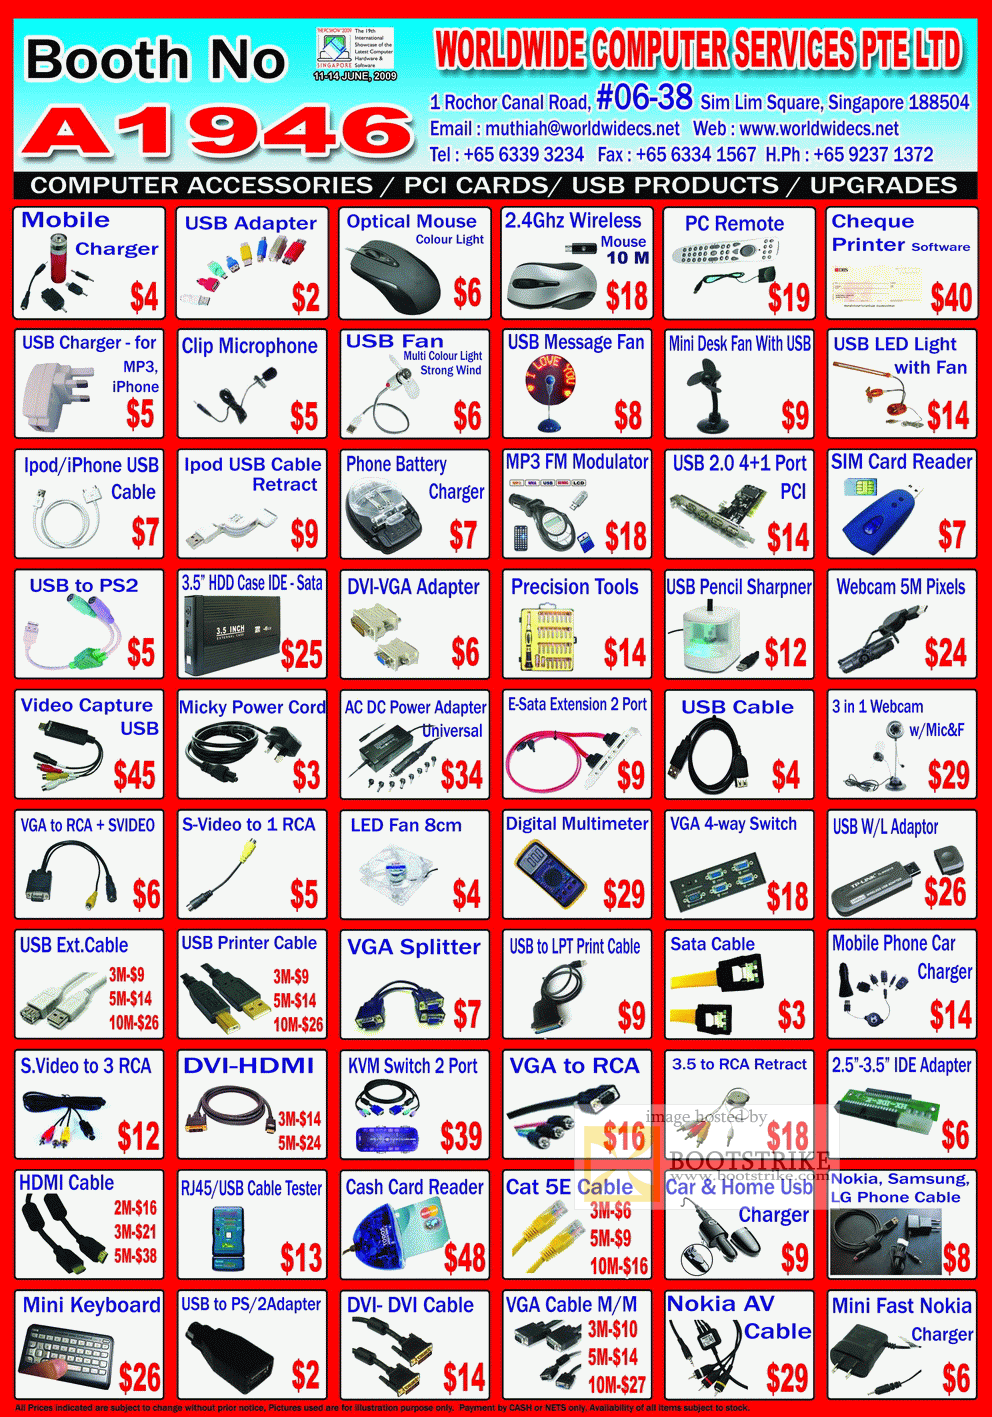 PC Show 2009 price list image brochure of Worldwide Computer Accessories Page 2